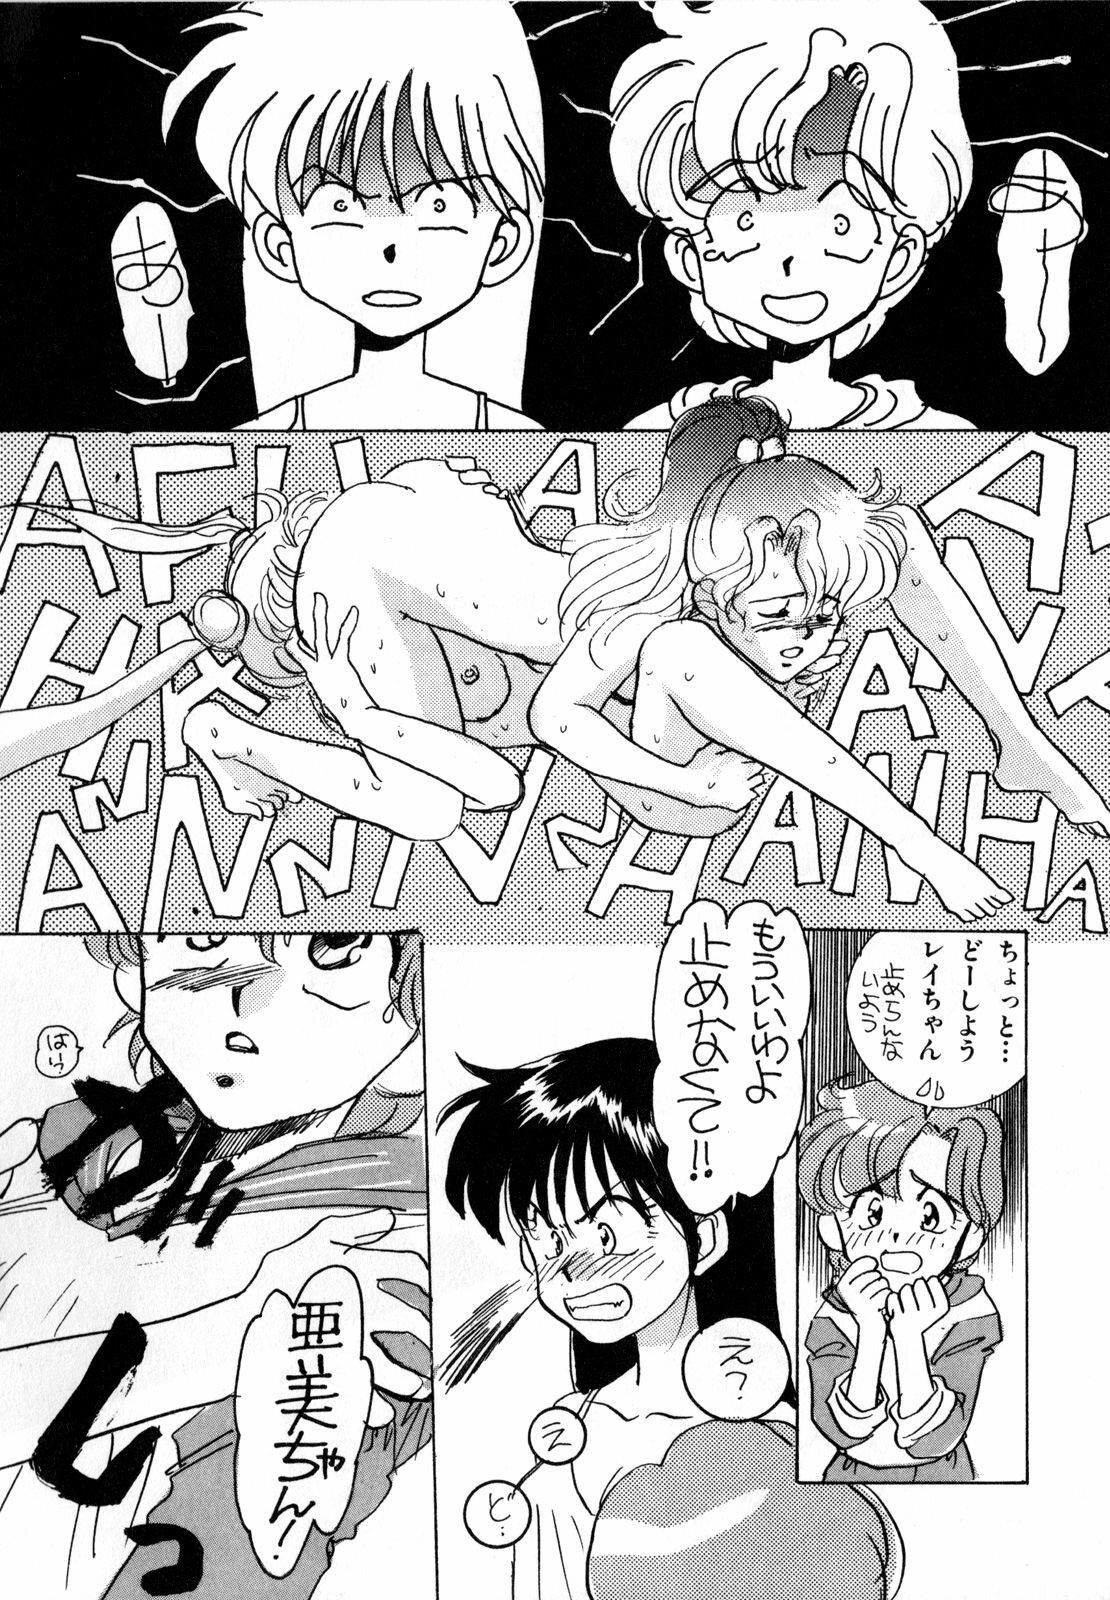 [Anthology] Lunatic Party 1 (Sailor Moon) page 37 full